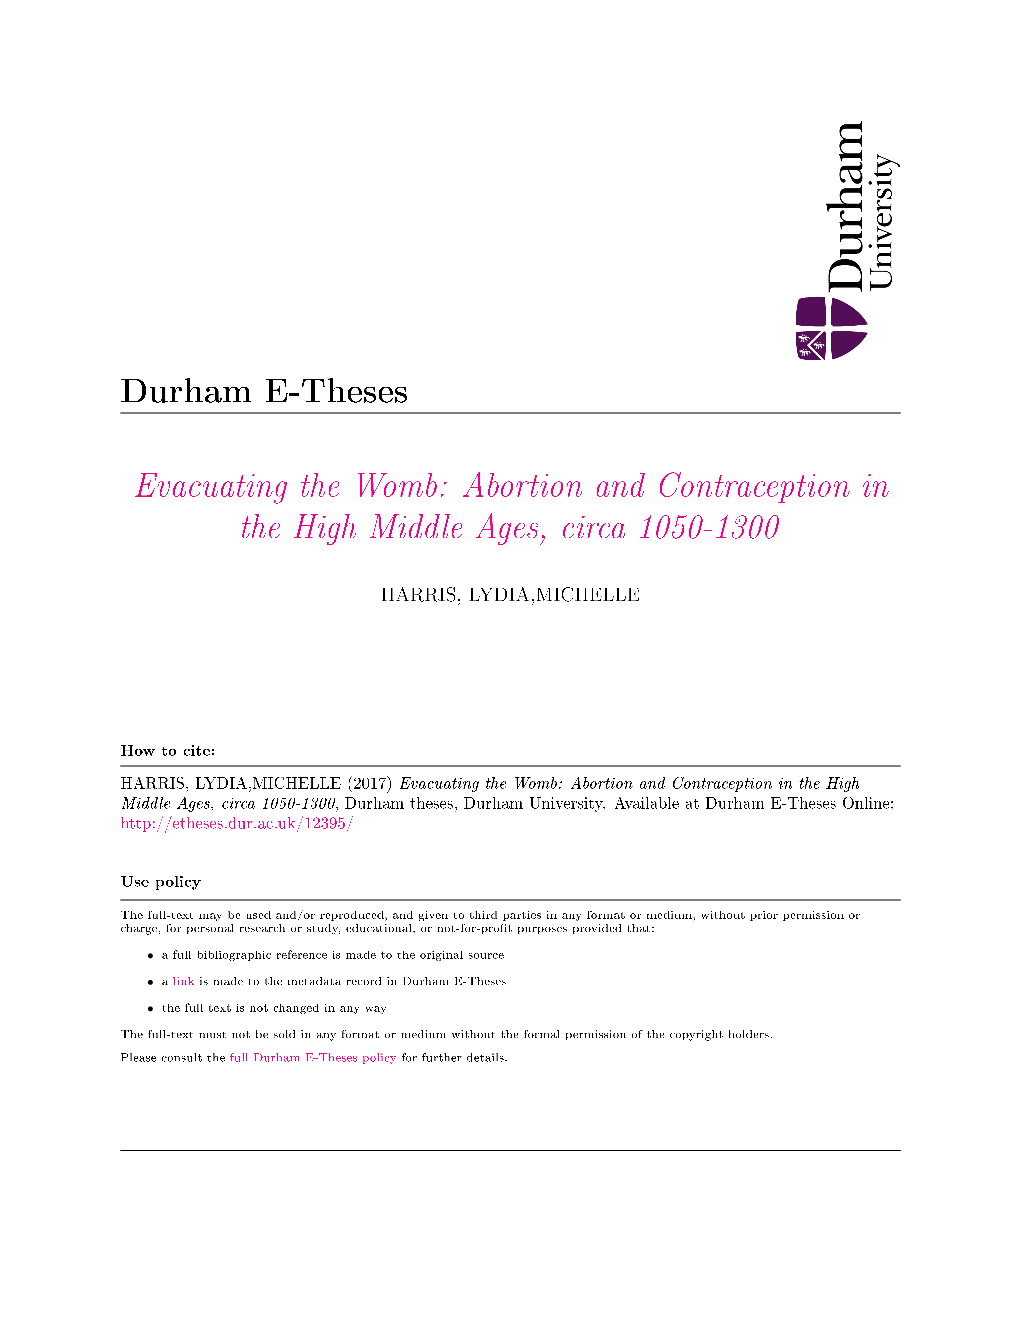 Abortion and Contraception in the High Middle Ages, Circa 1050-1300